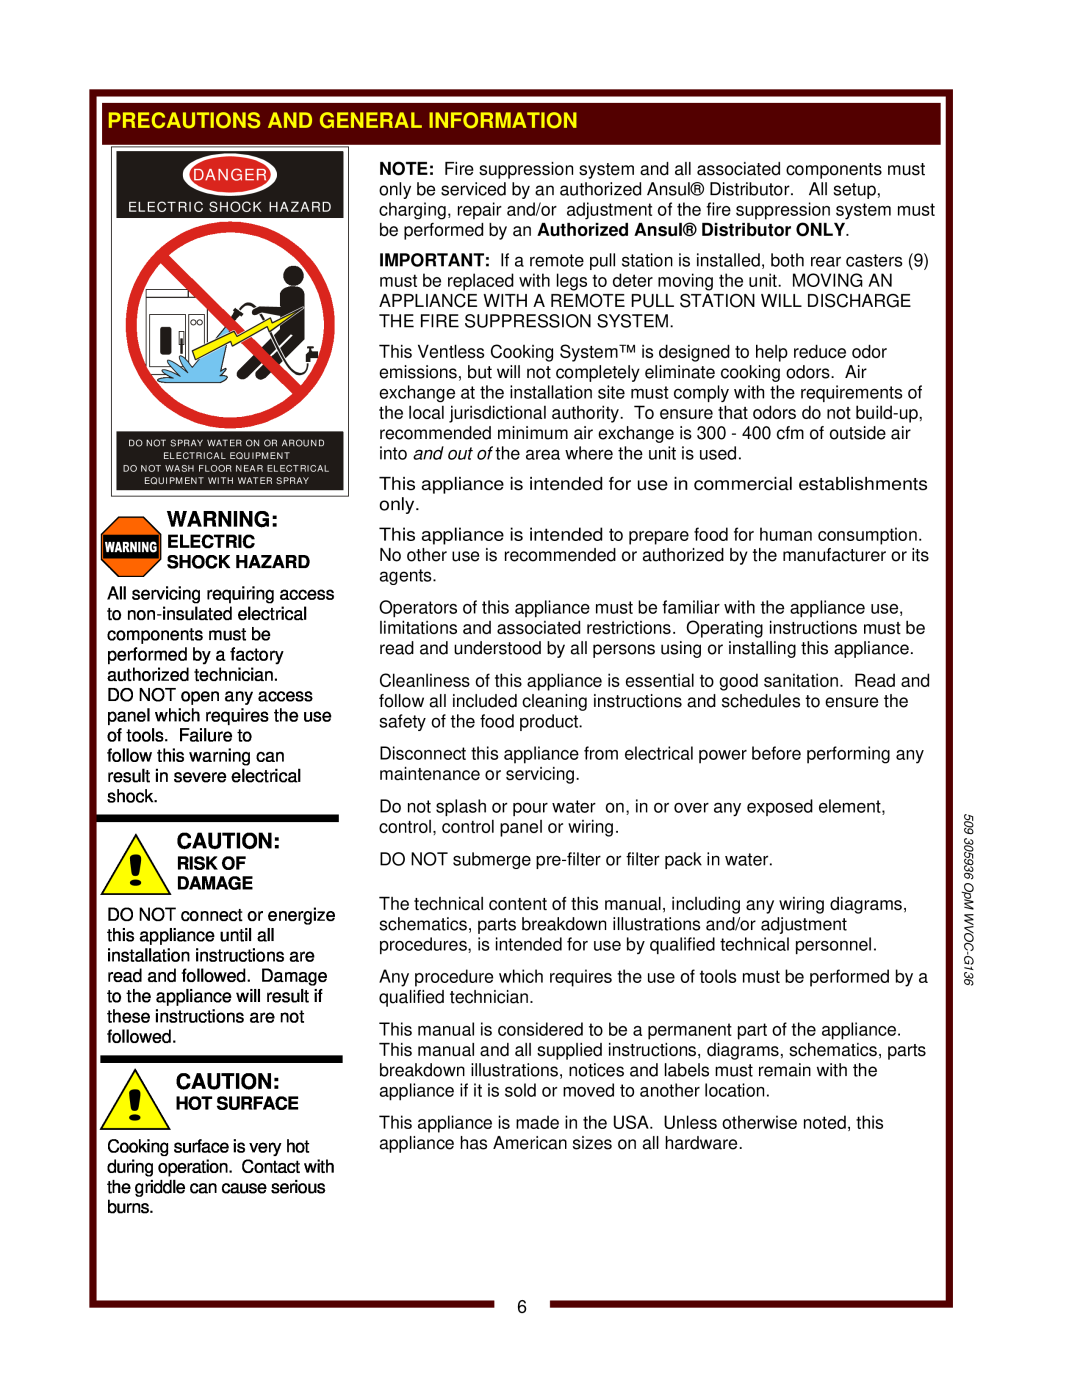 Wells WVOC-G136 operation manual Electric Shock Hazard, Risk Of Damage, Hot Surface 